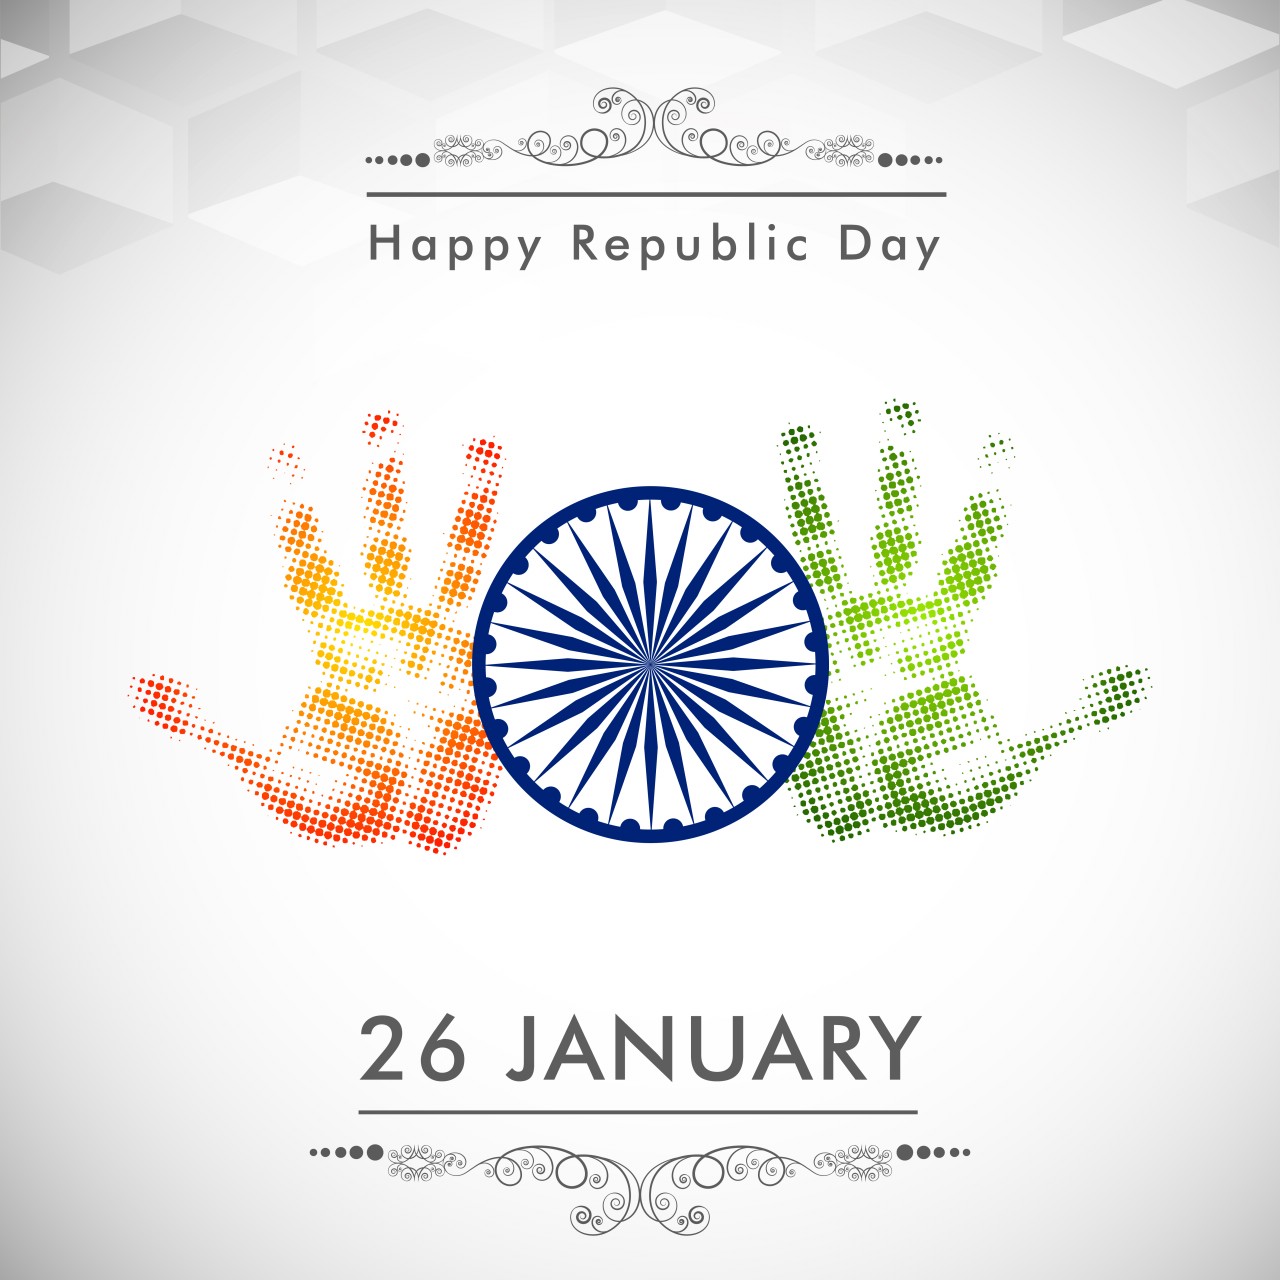 Here are some amazing Republic Day Greetings, Messages, Images & Quotes for the Patriot in you